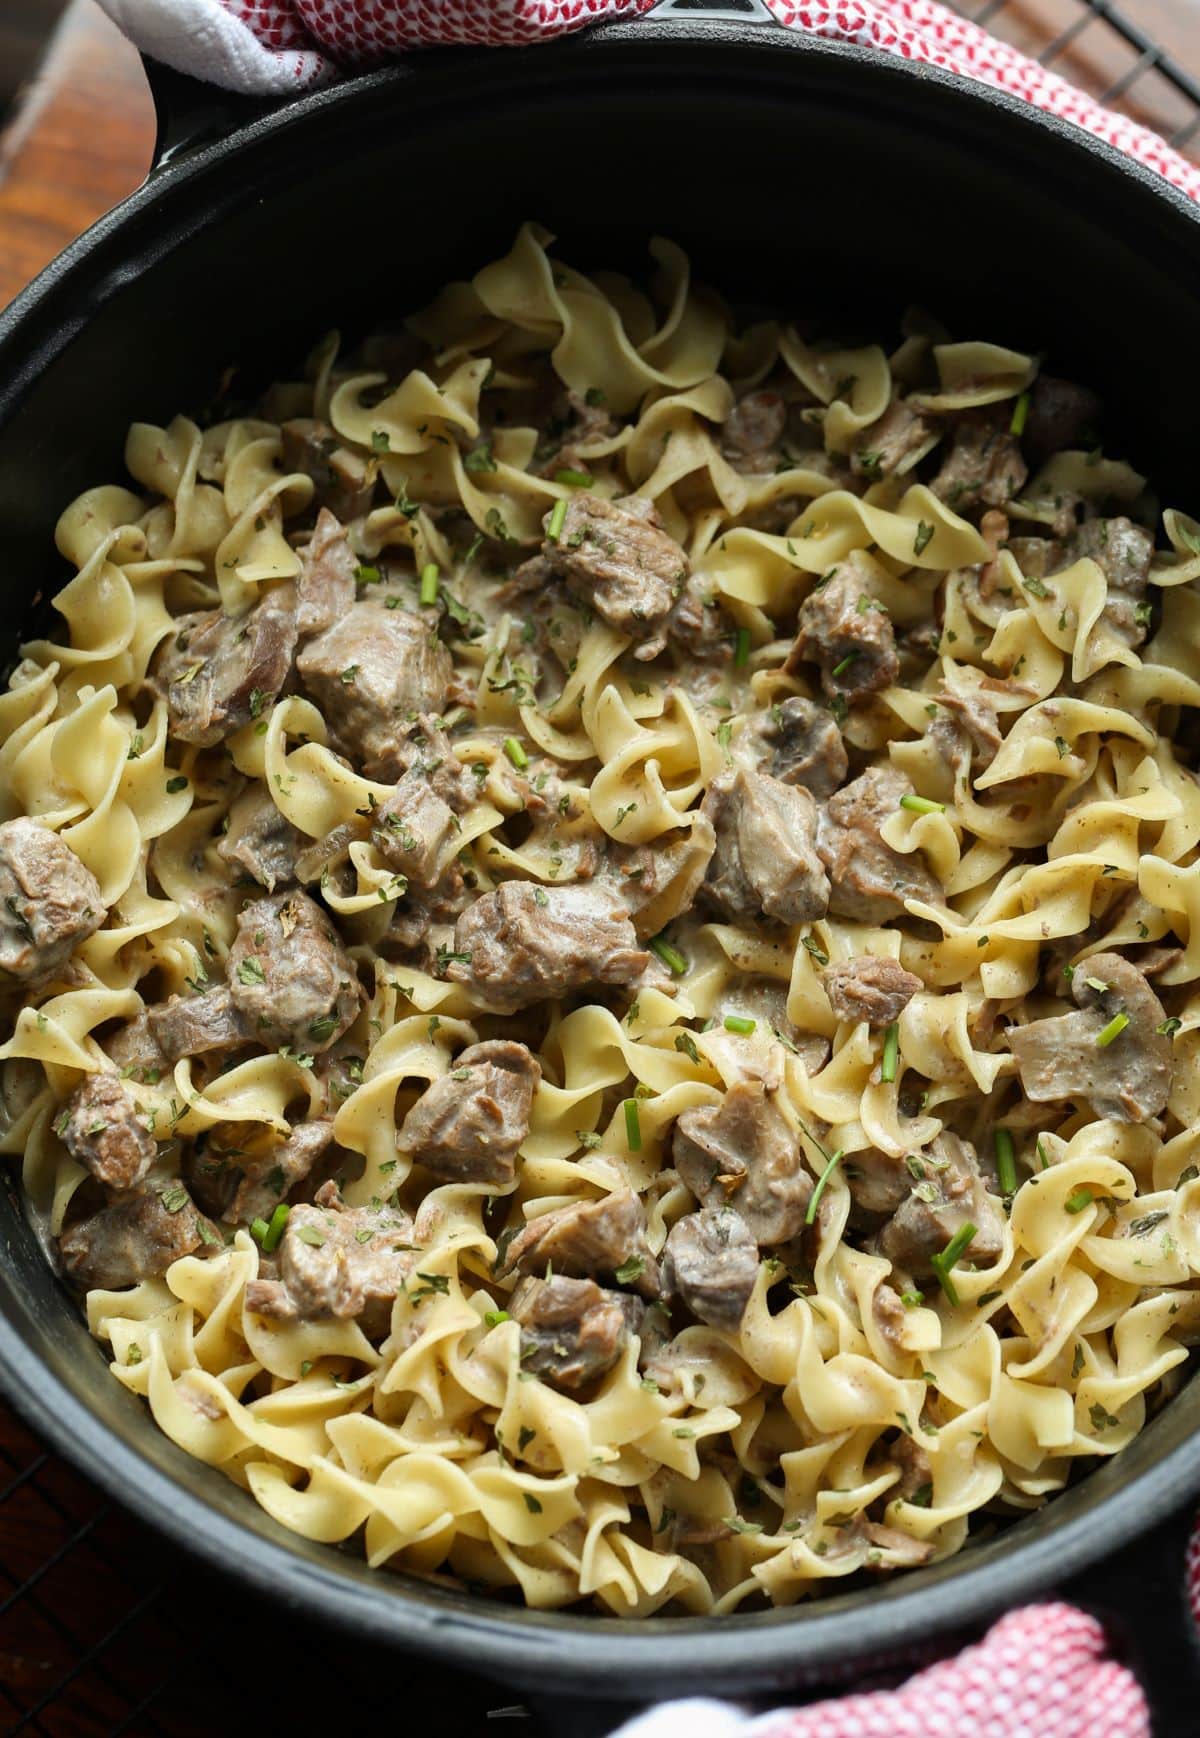 Overhead shot of a round, dark ceramic Crock Pot filled with egg noodles and chunks of beef in a creamy stroganoff sauce.